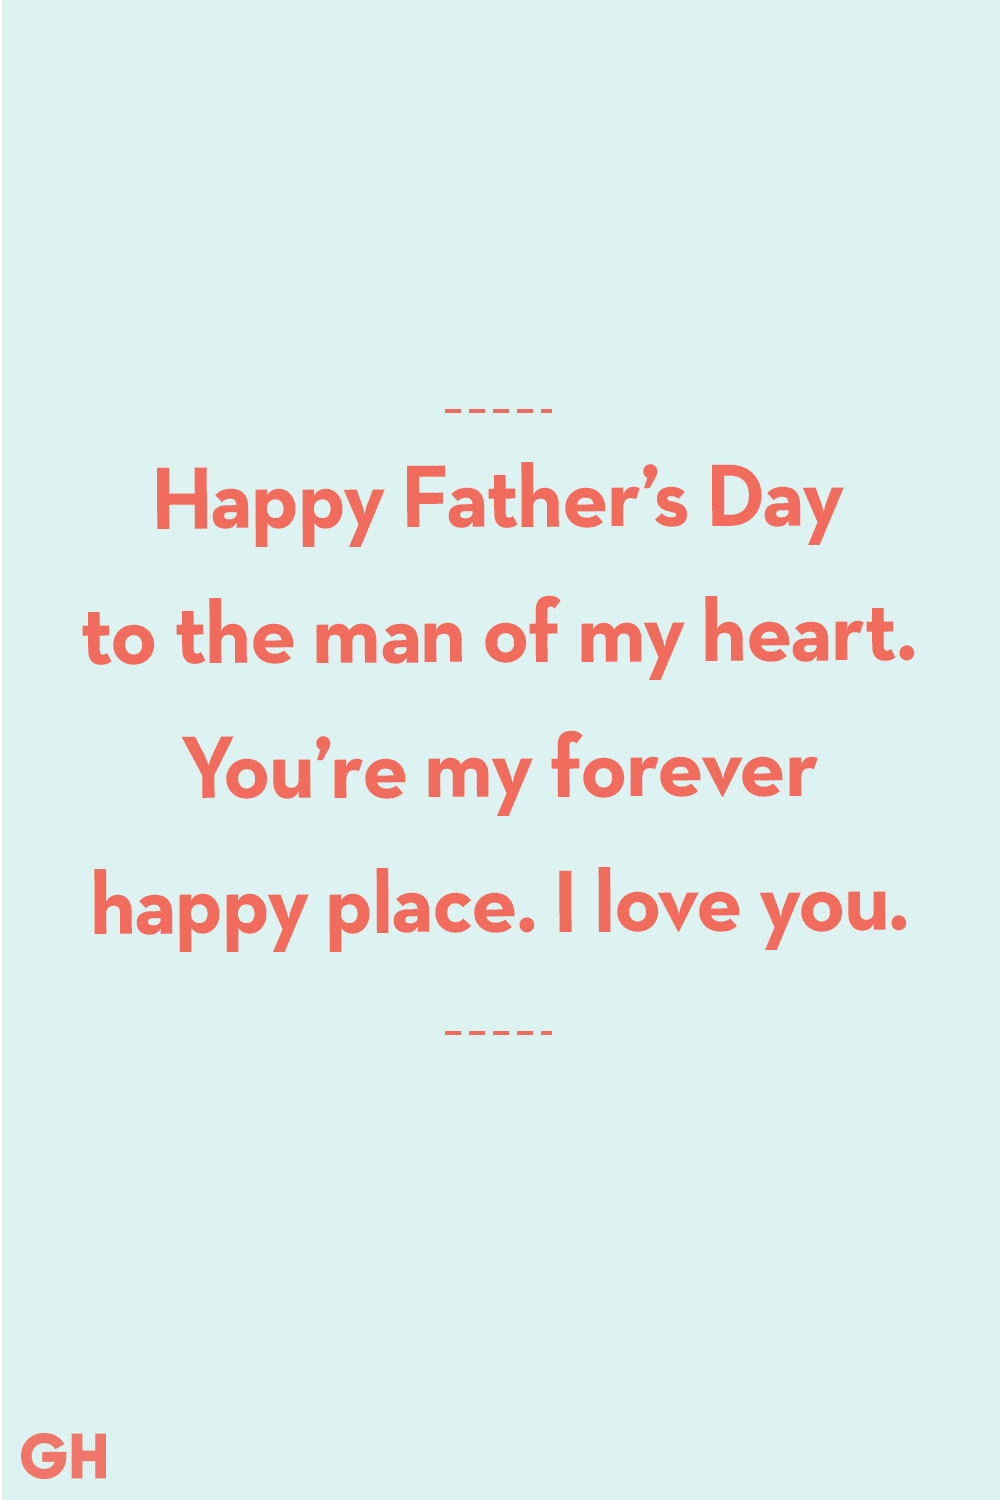 Happy Fathers Day Wishes From Wife To Husband